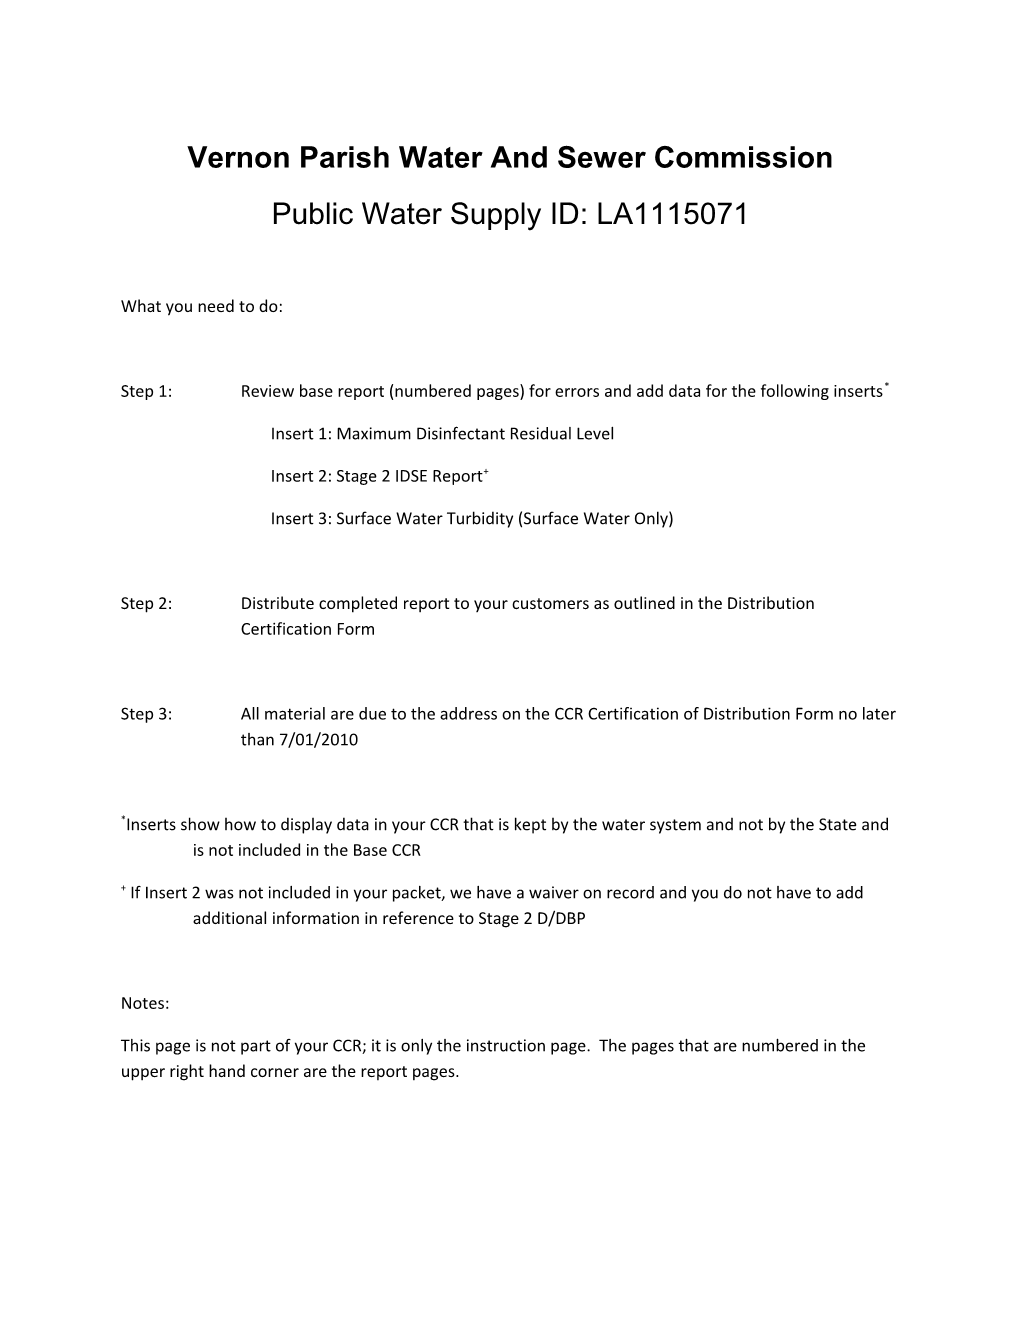 Vernon Parish Water and Sewer Commission